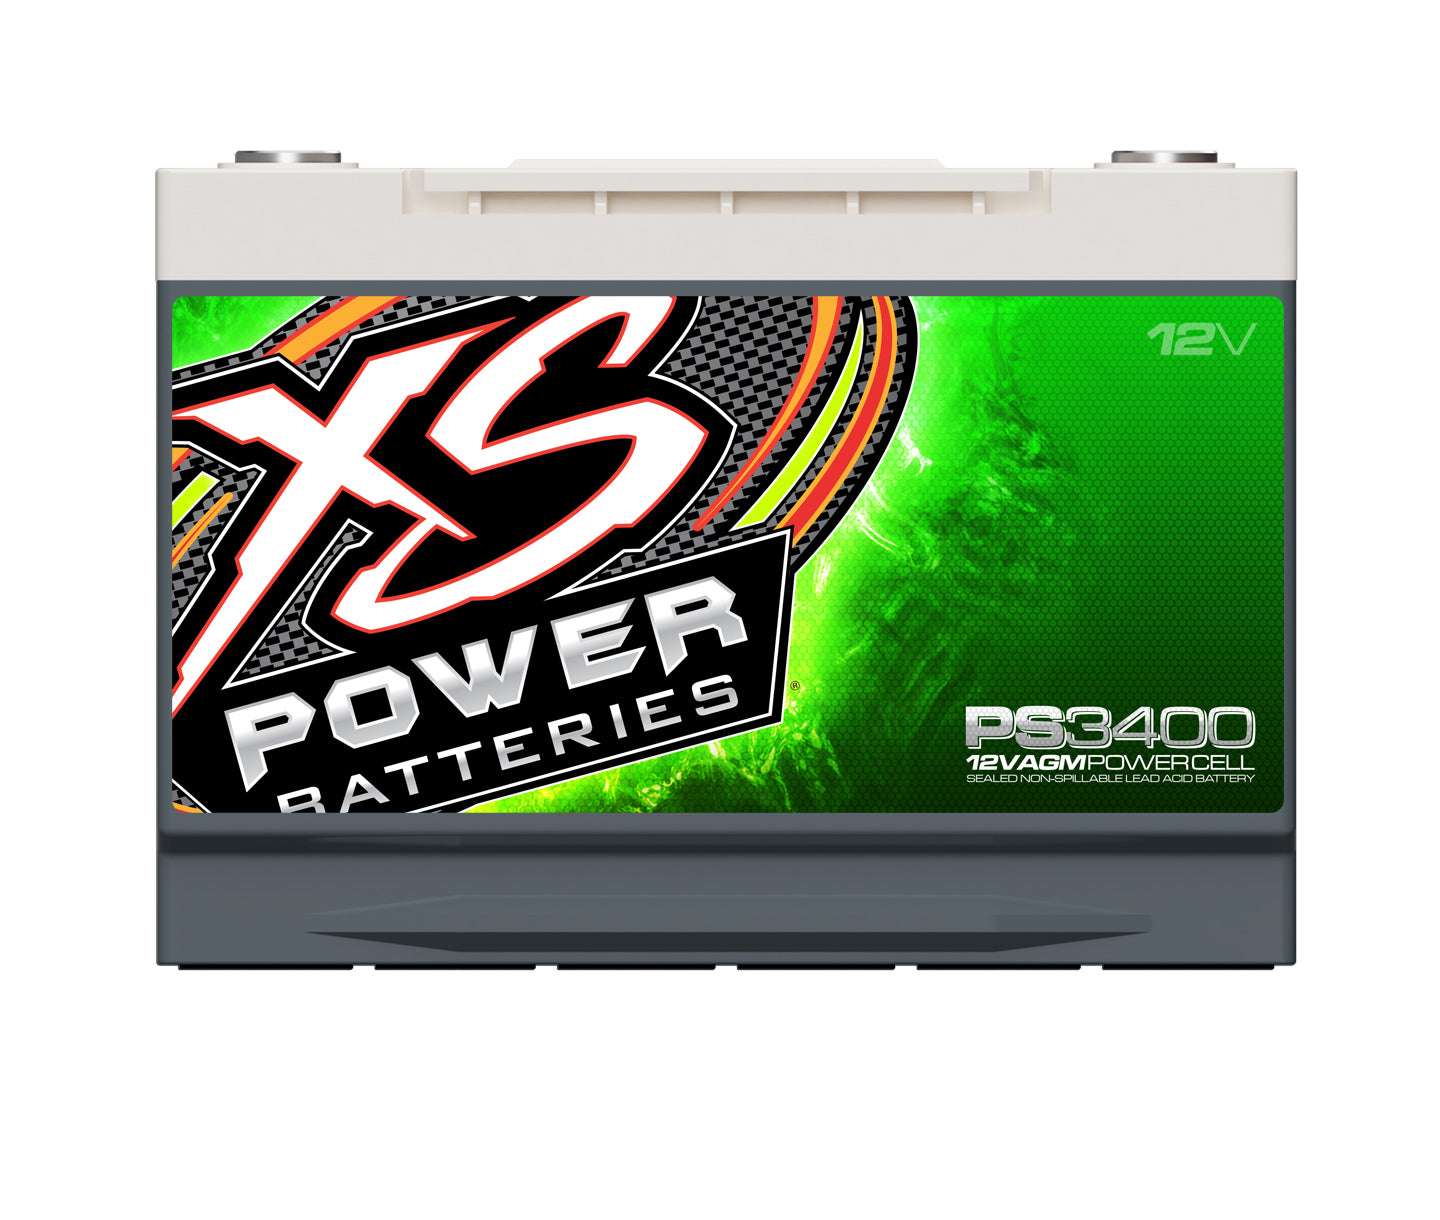 PS3400 XS Power 12VDC Group 34 AGM Powersports Vehicle Battery 3300A 80Ah